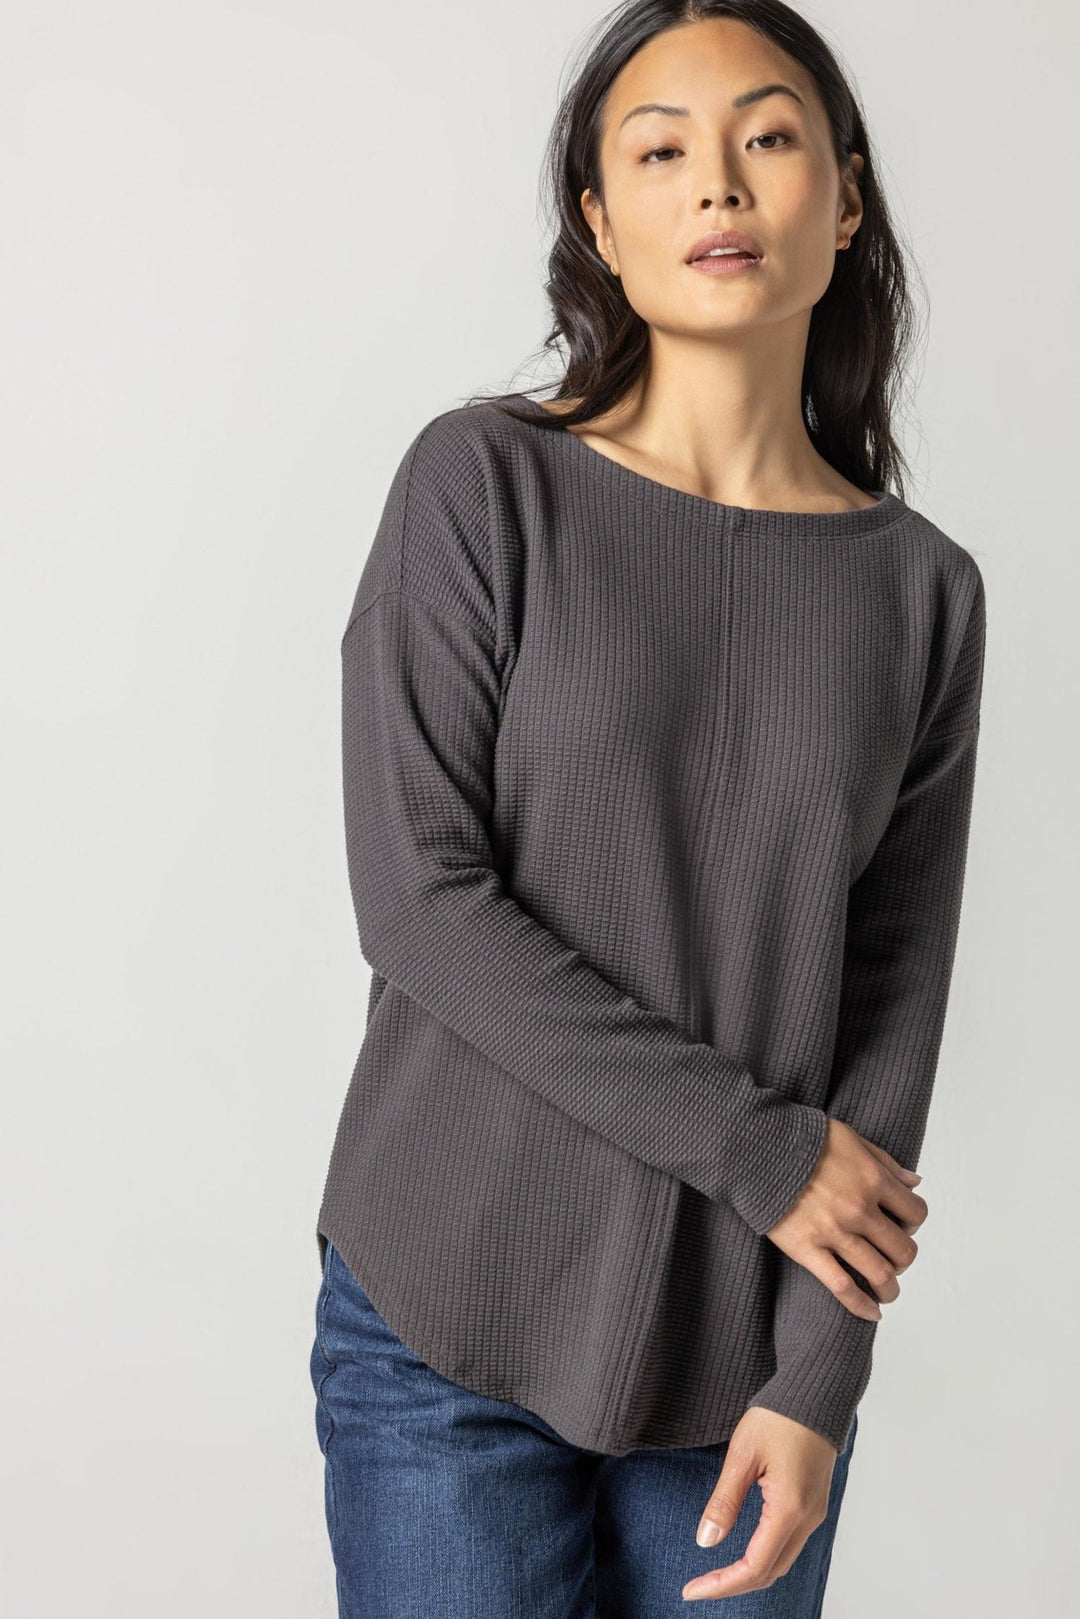 Lilla P - Shirttail Hem L/S Waffle: Earth - Shorely Chic Boutique